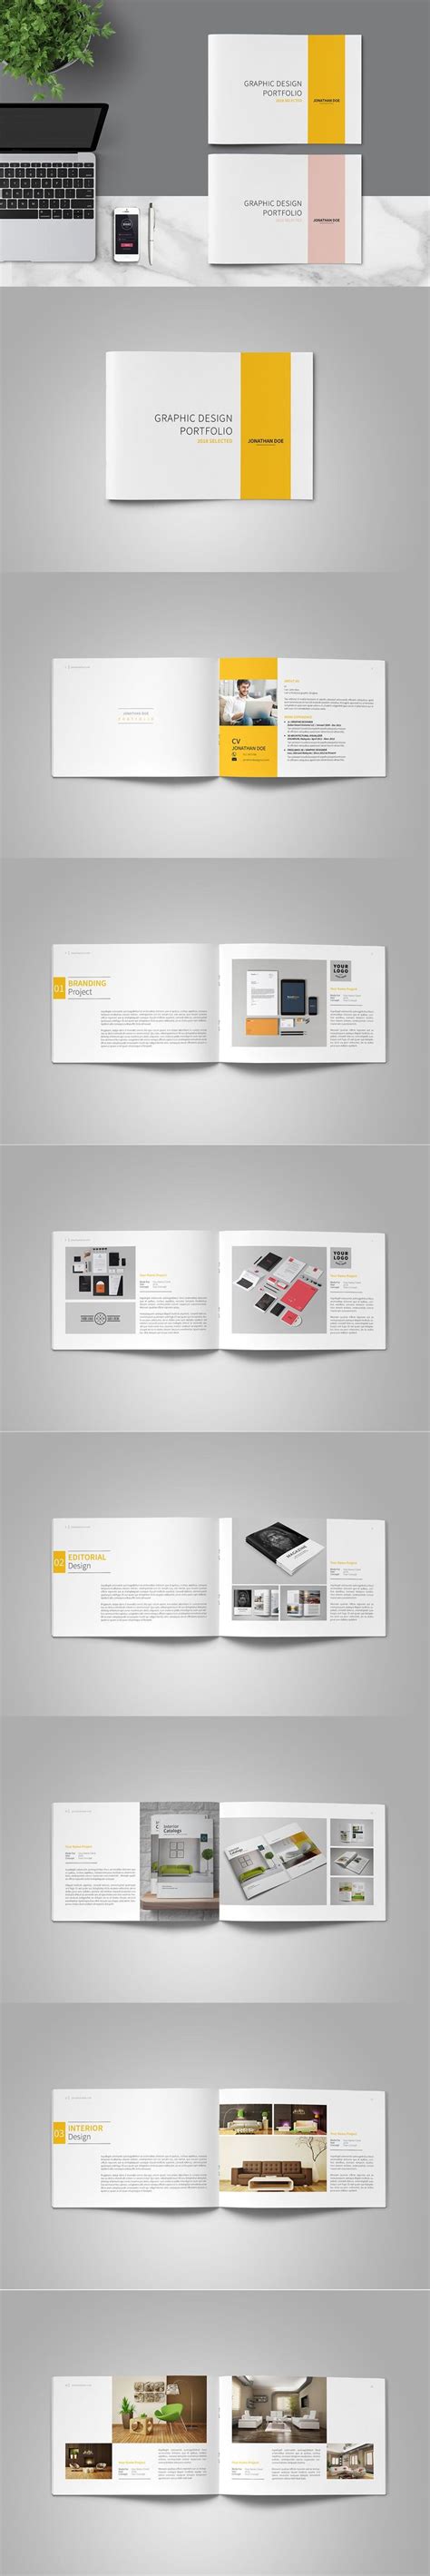 My own personal portfolio to present my work, brand myself and promote myself to future employers. Graphic Design Portfolio Template PDF (With images ...